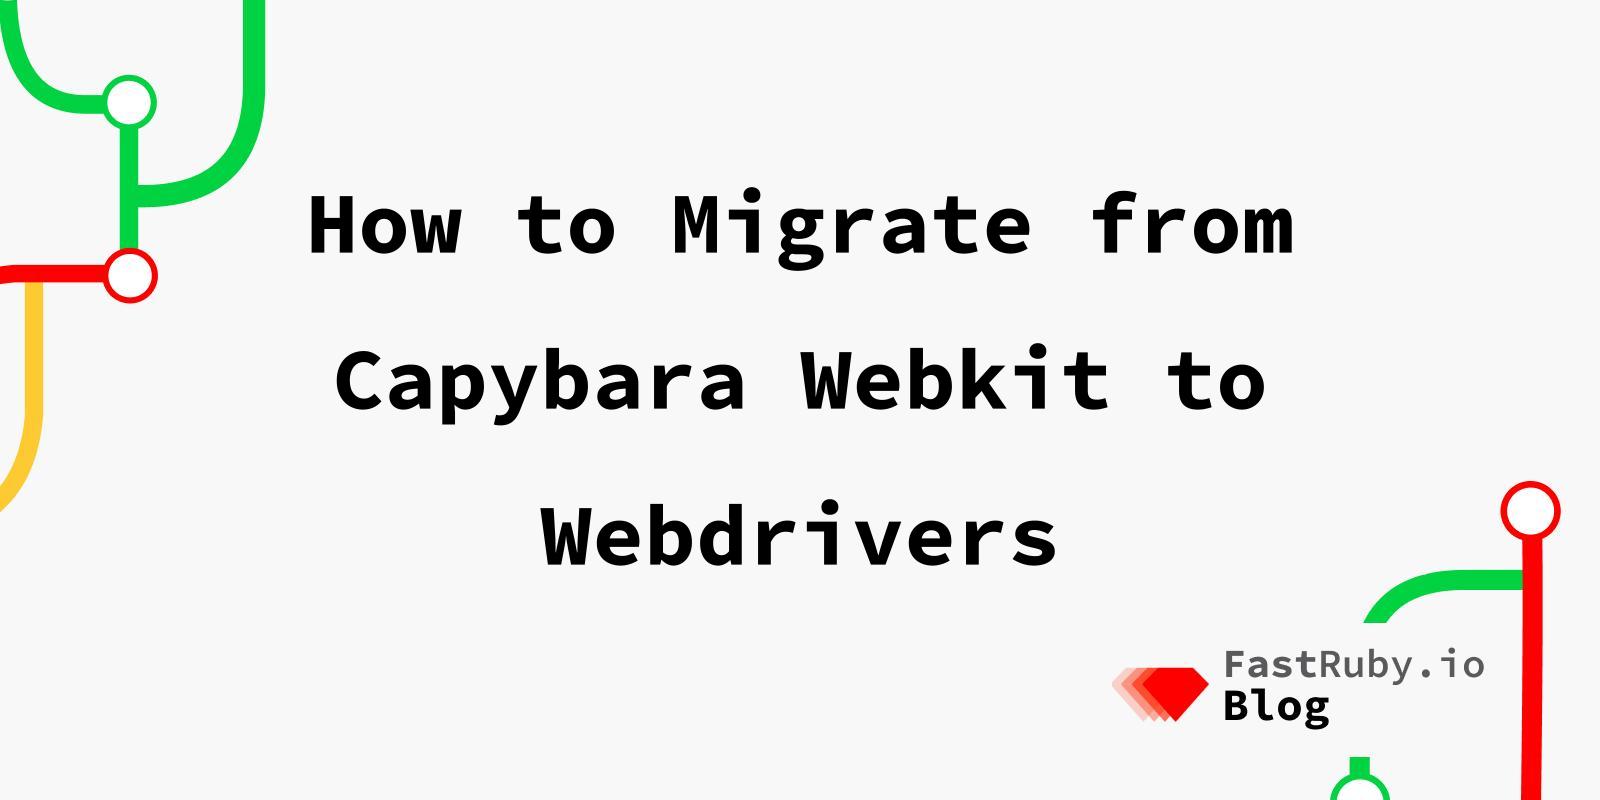 How to Migrate from Capybara Webkit to Webdrivers